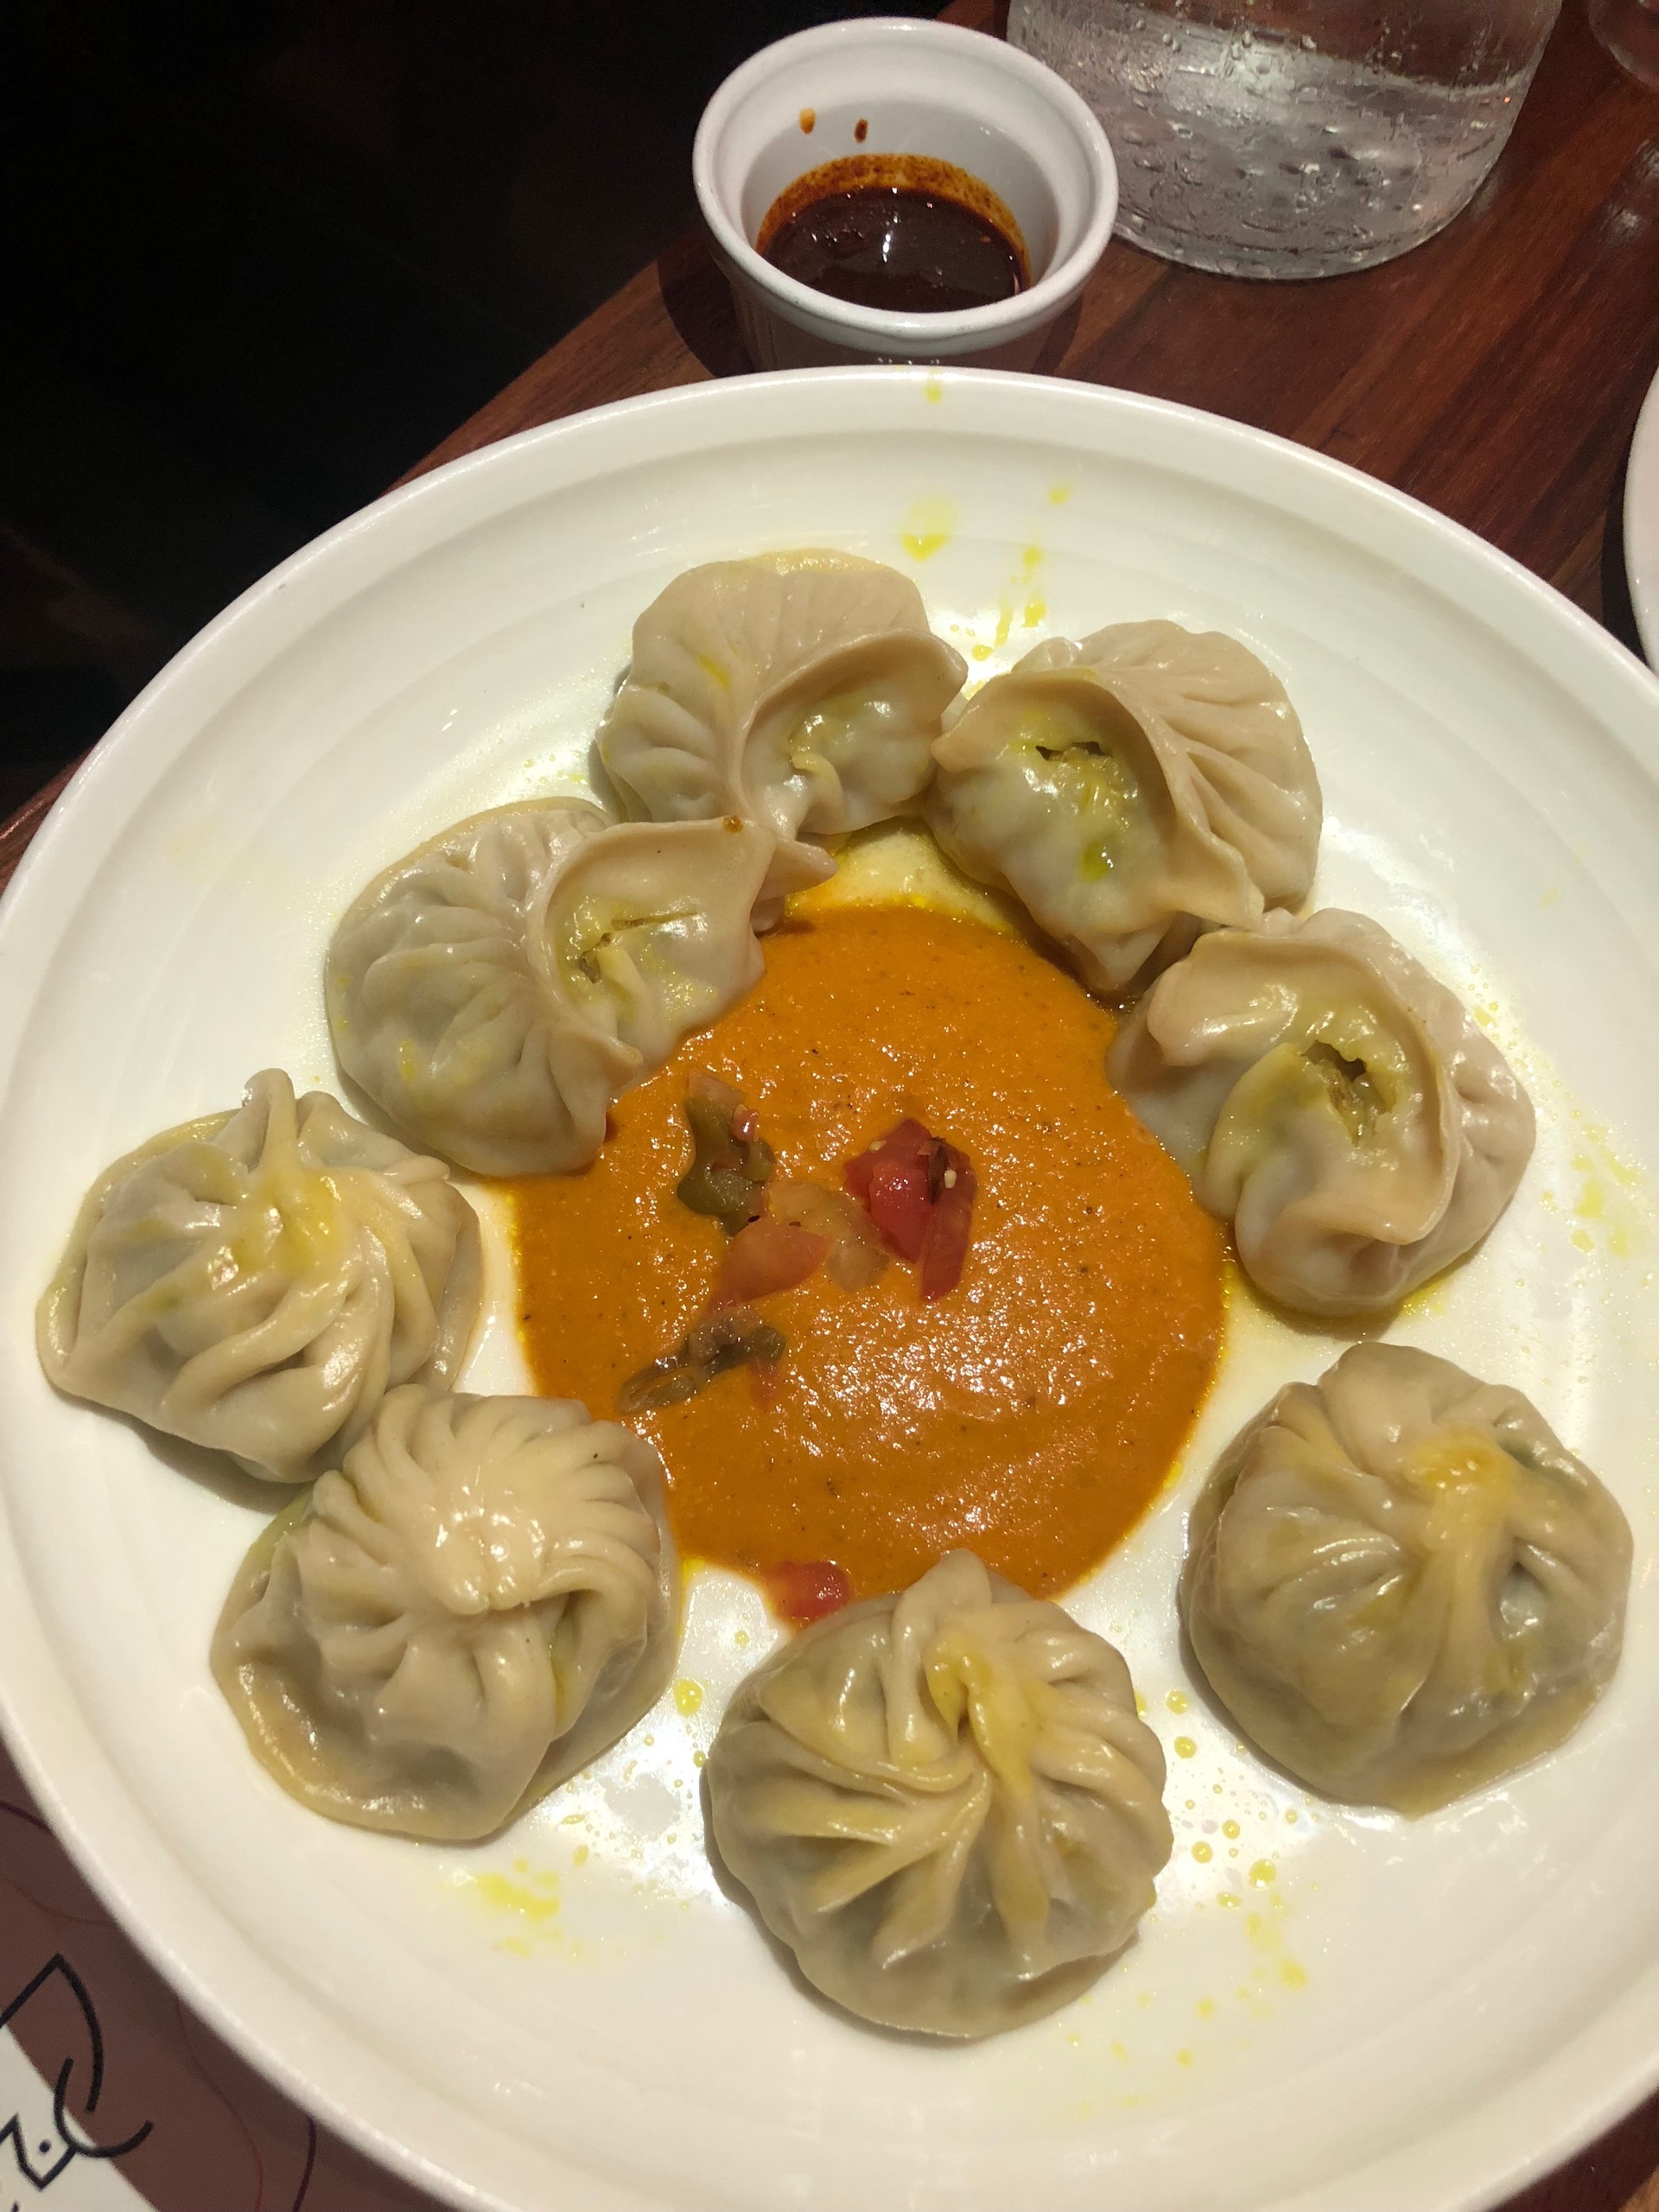 A chicken and vegetable momo platter at the Mission’s Dancing Yak